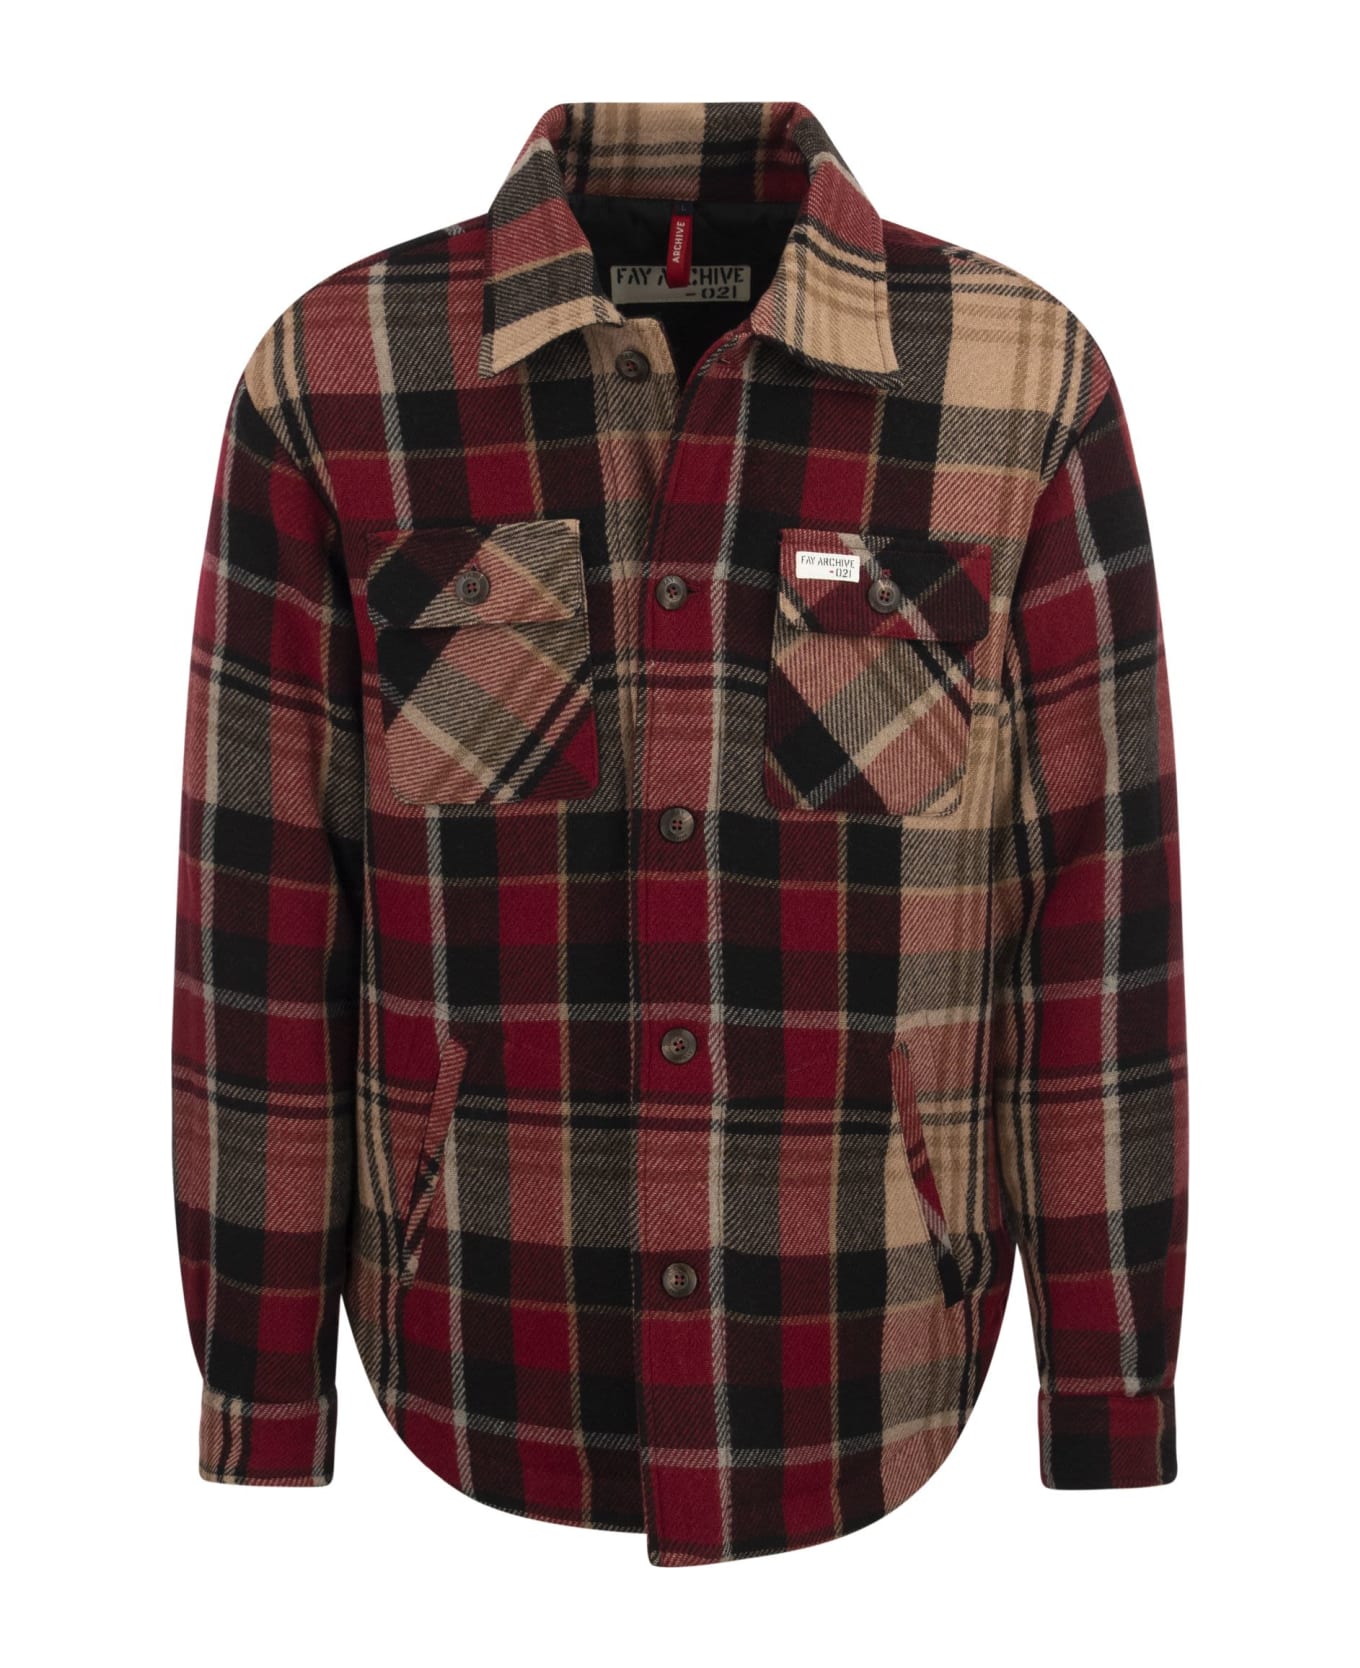 Fay Shirt-cut Check Jacket - Red/beige